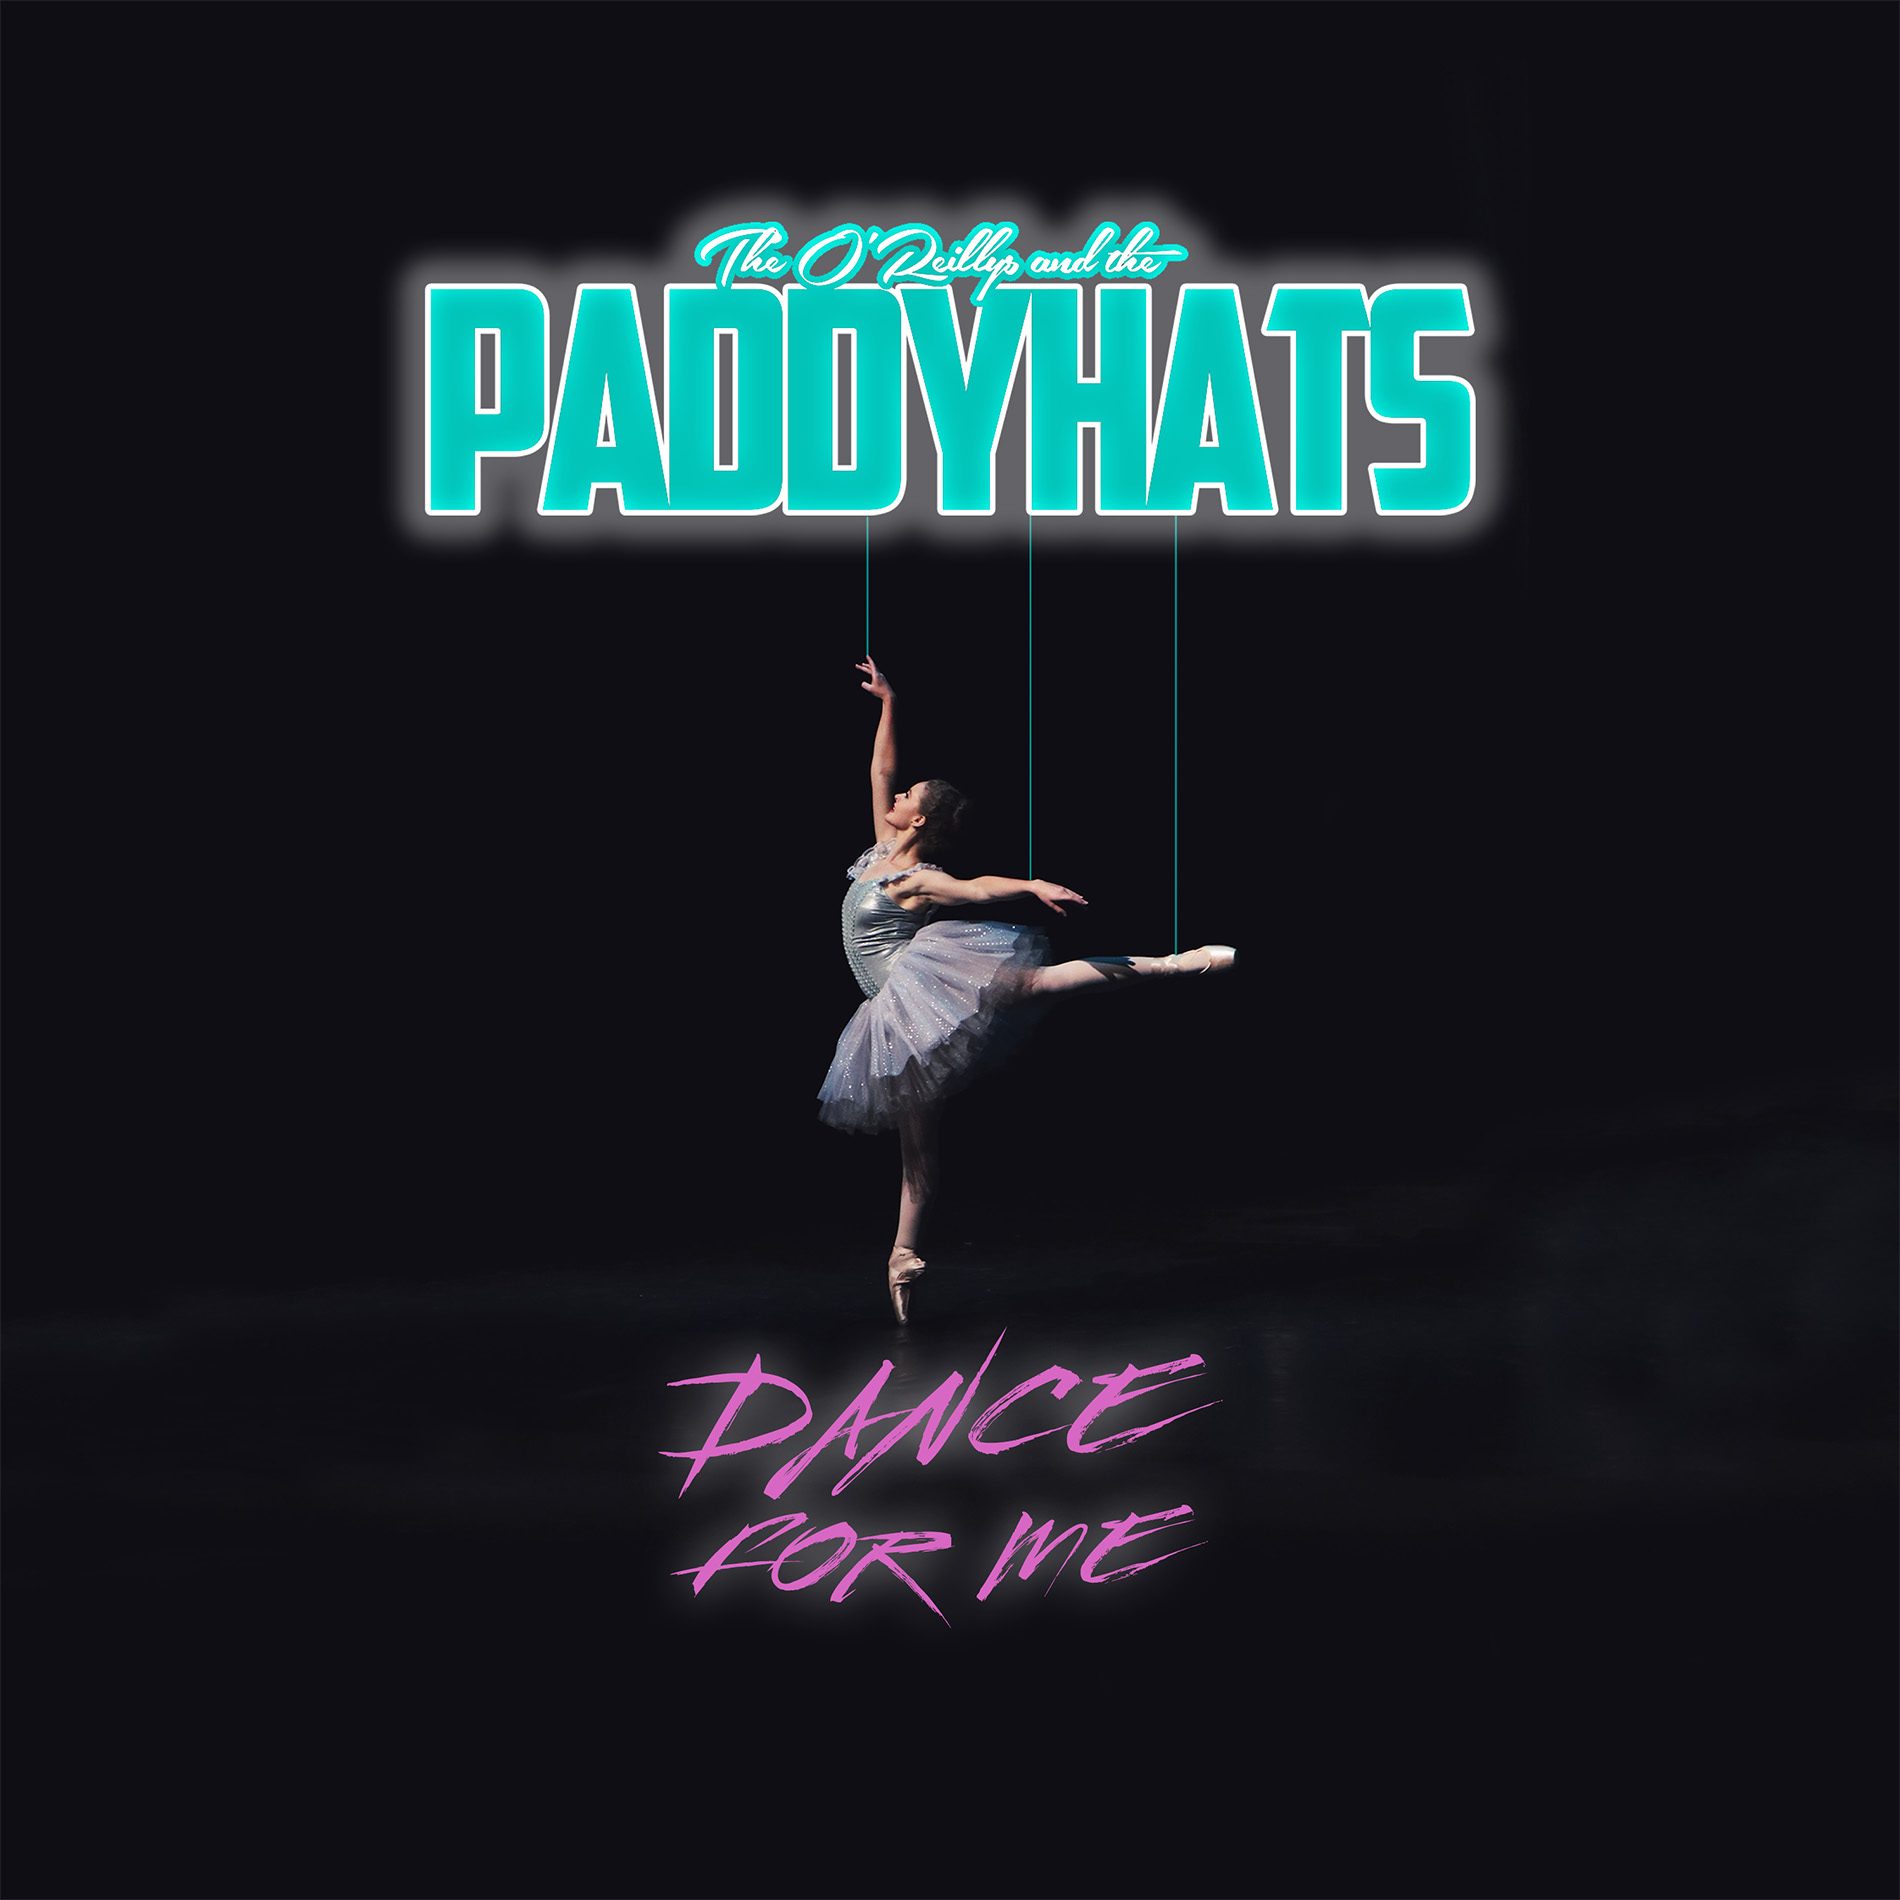 Our new single “DANCE FOR ME” is out now!